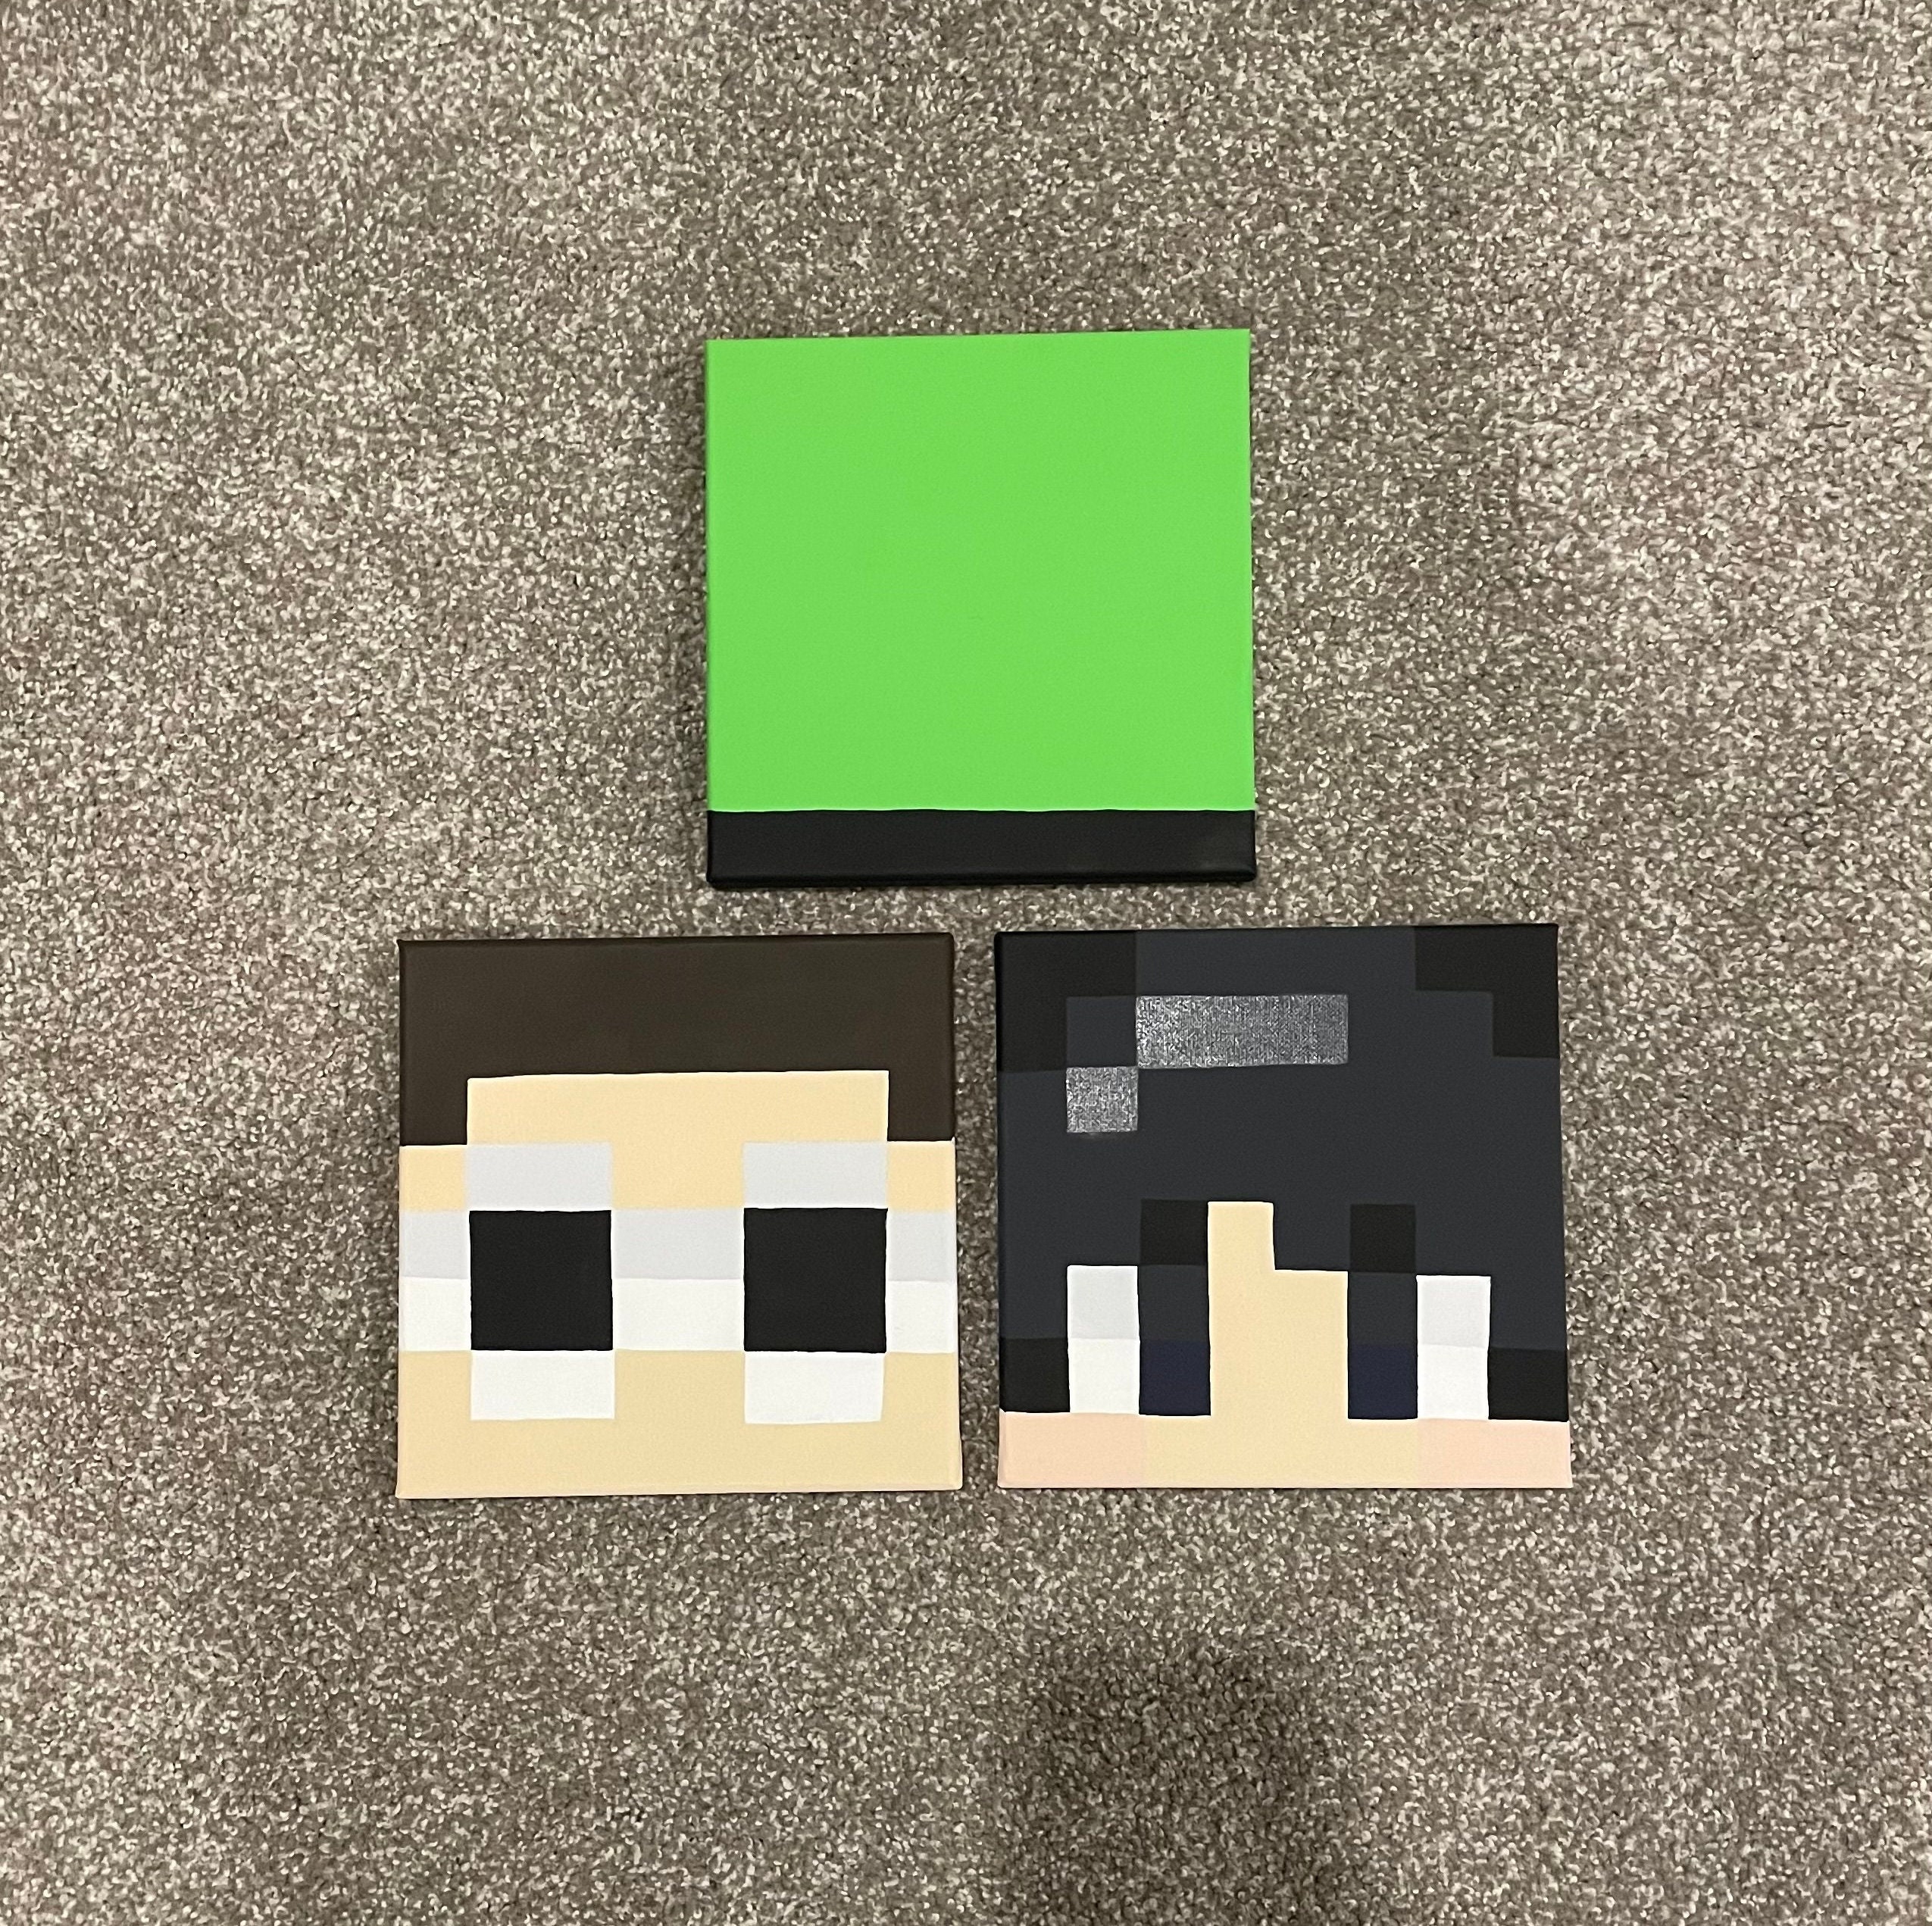 Dream Smp Minecraft Head Paintings Etsy Canada